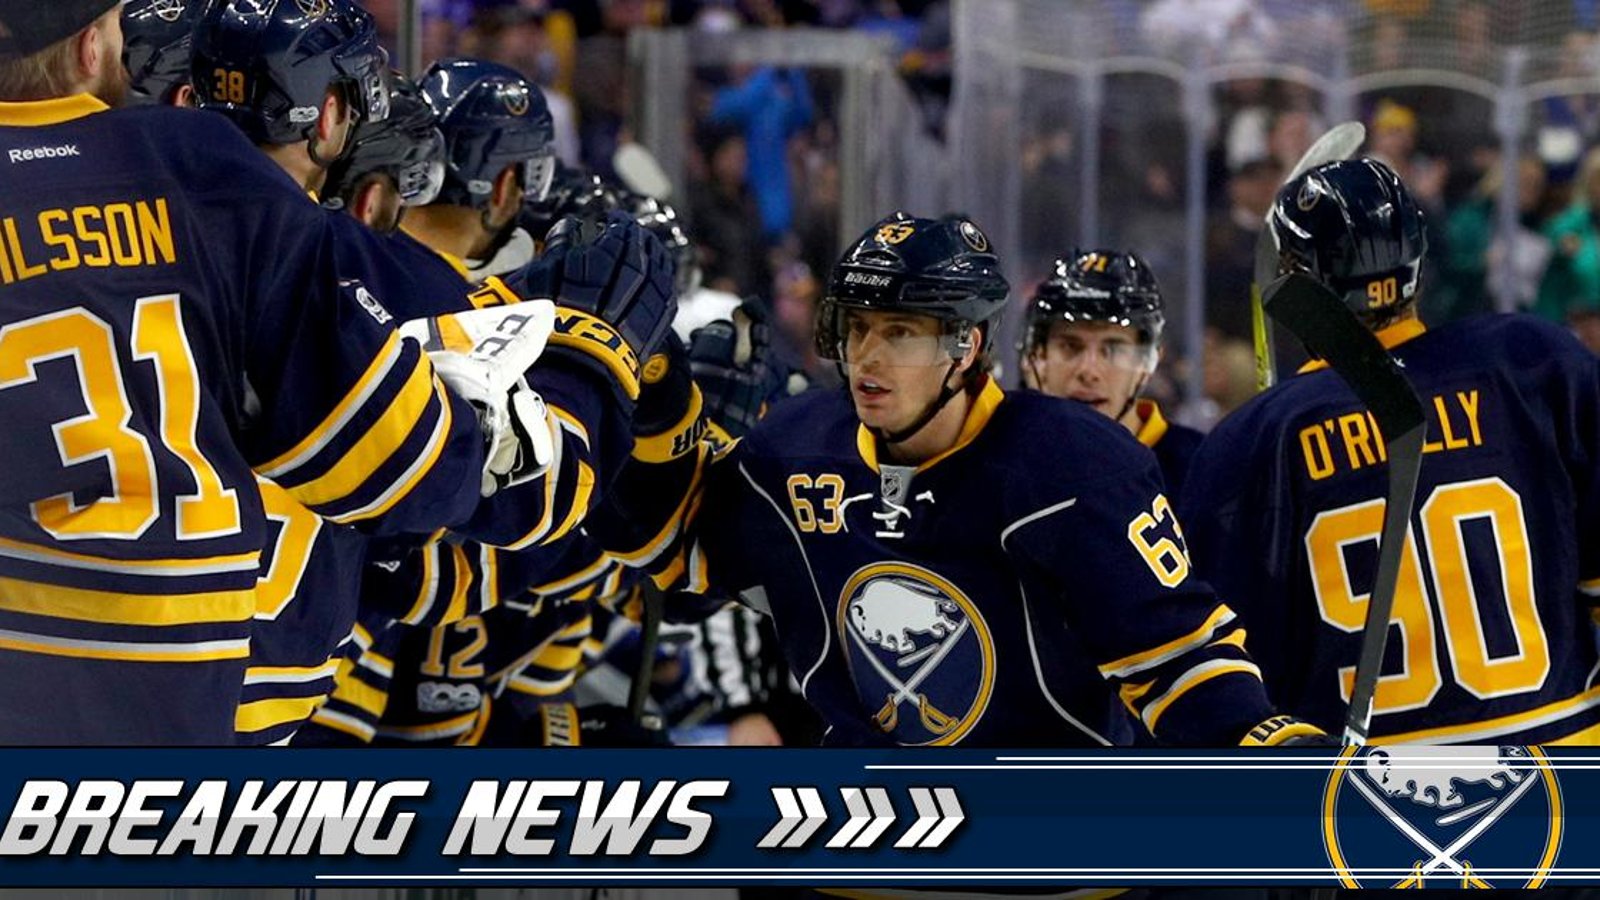 BREAKING : Sabres' star gets leadership role in World Championship! 